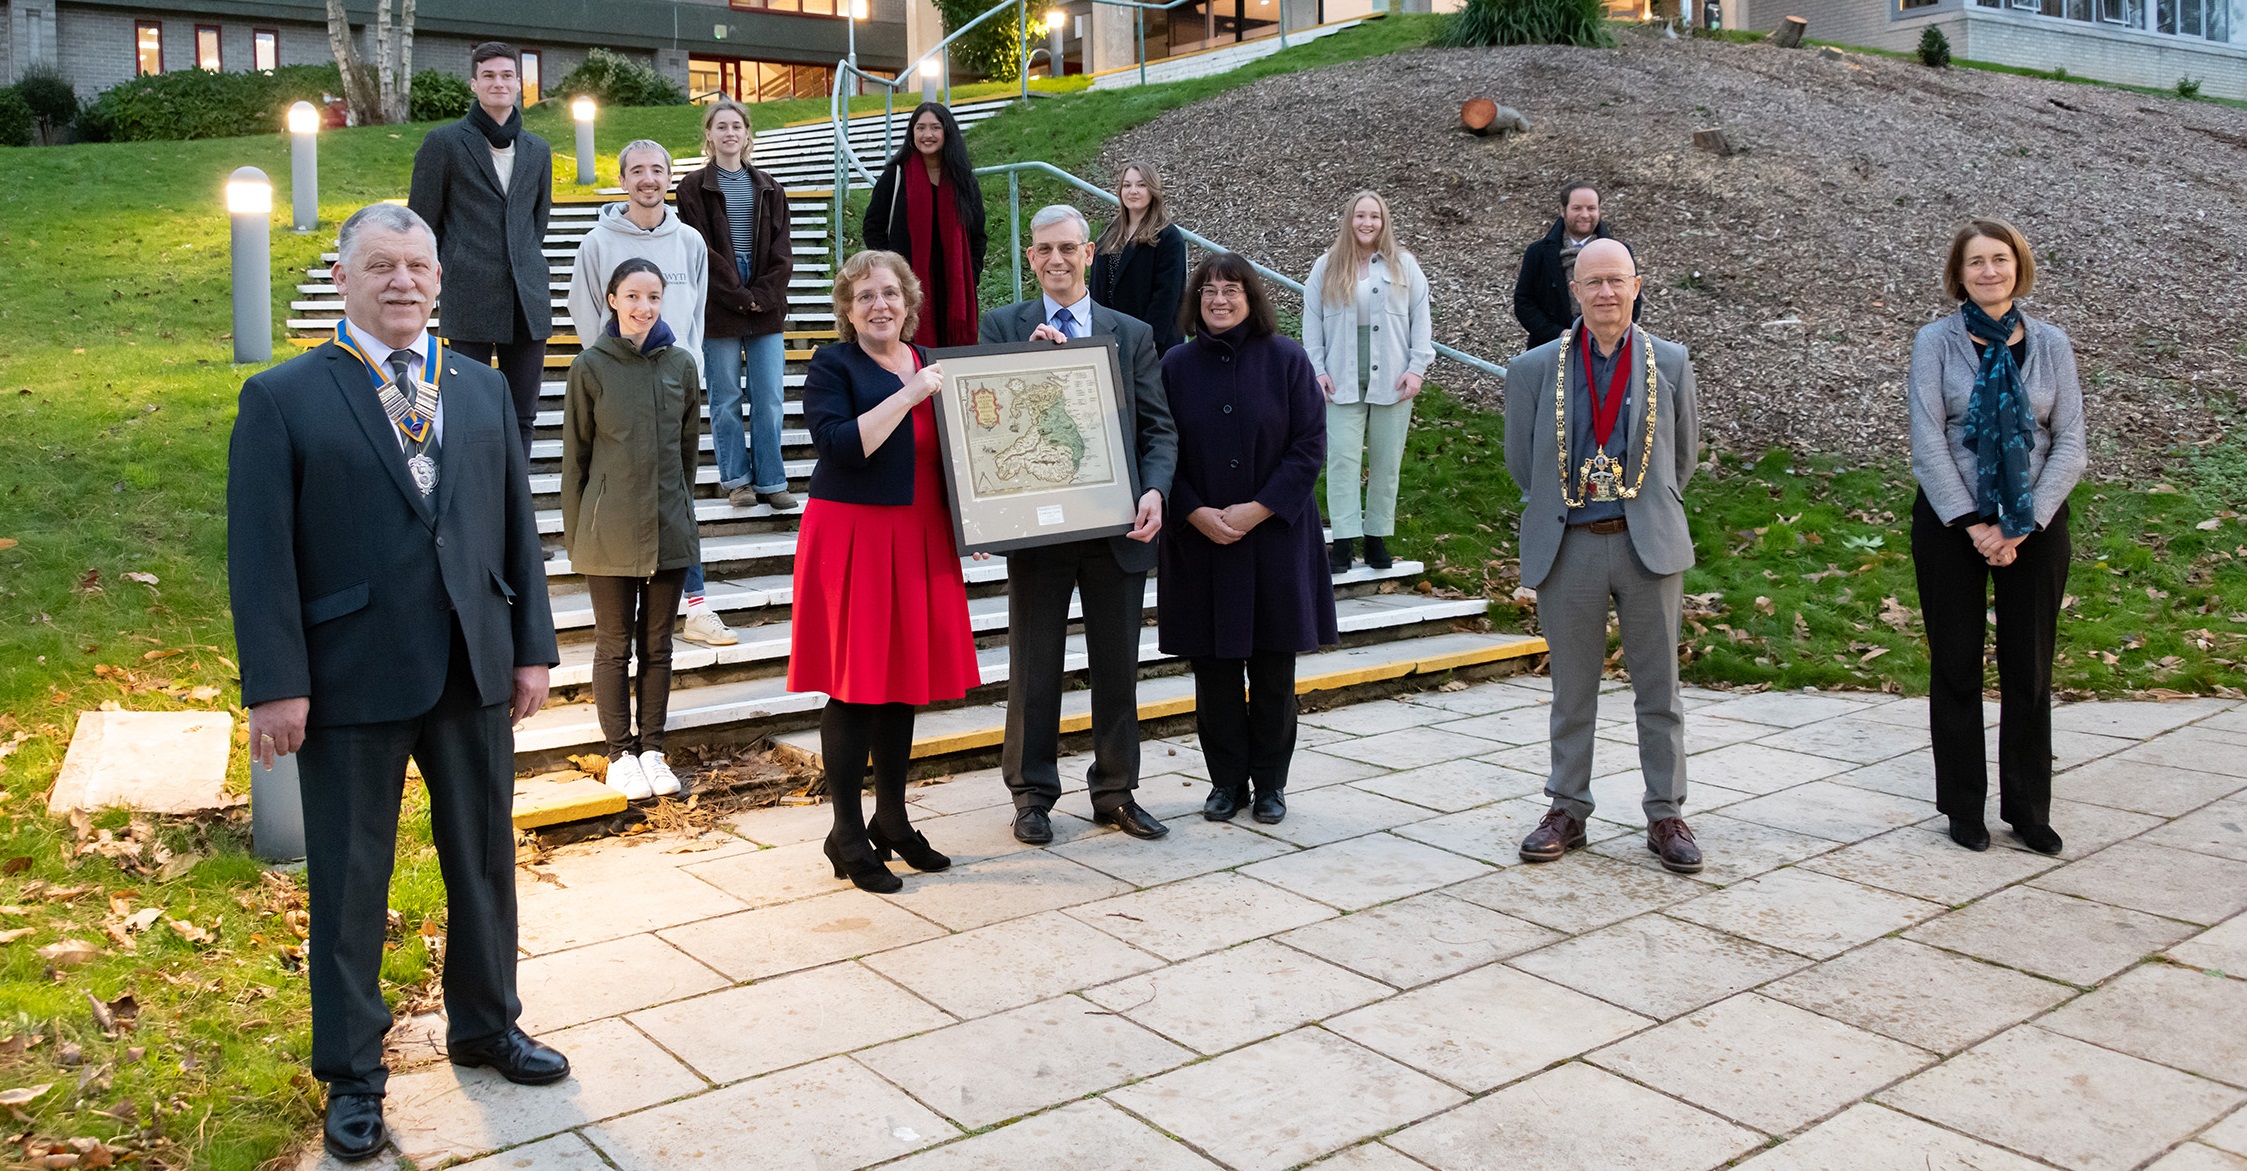 Aberystwyth University Vice-Chancellor Professor Elizabeth Treasure presents a copy of Humphrey Llwyd's Cambriae Typus, printed in 1573 in Antwerp by Abraham Ortelius, to Mr William Parker and Vivien Hopkirk to mark the launch of the European Opportunities Fund, which has been funded by a generous donation by Mr Parker.